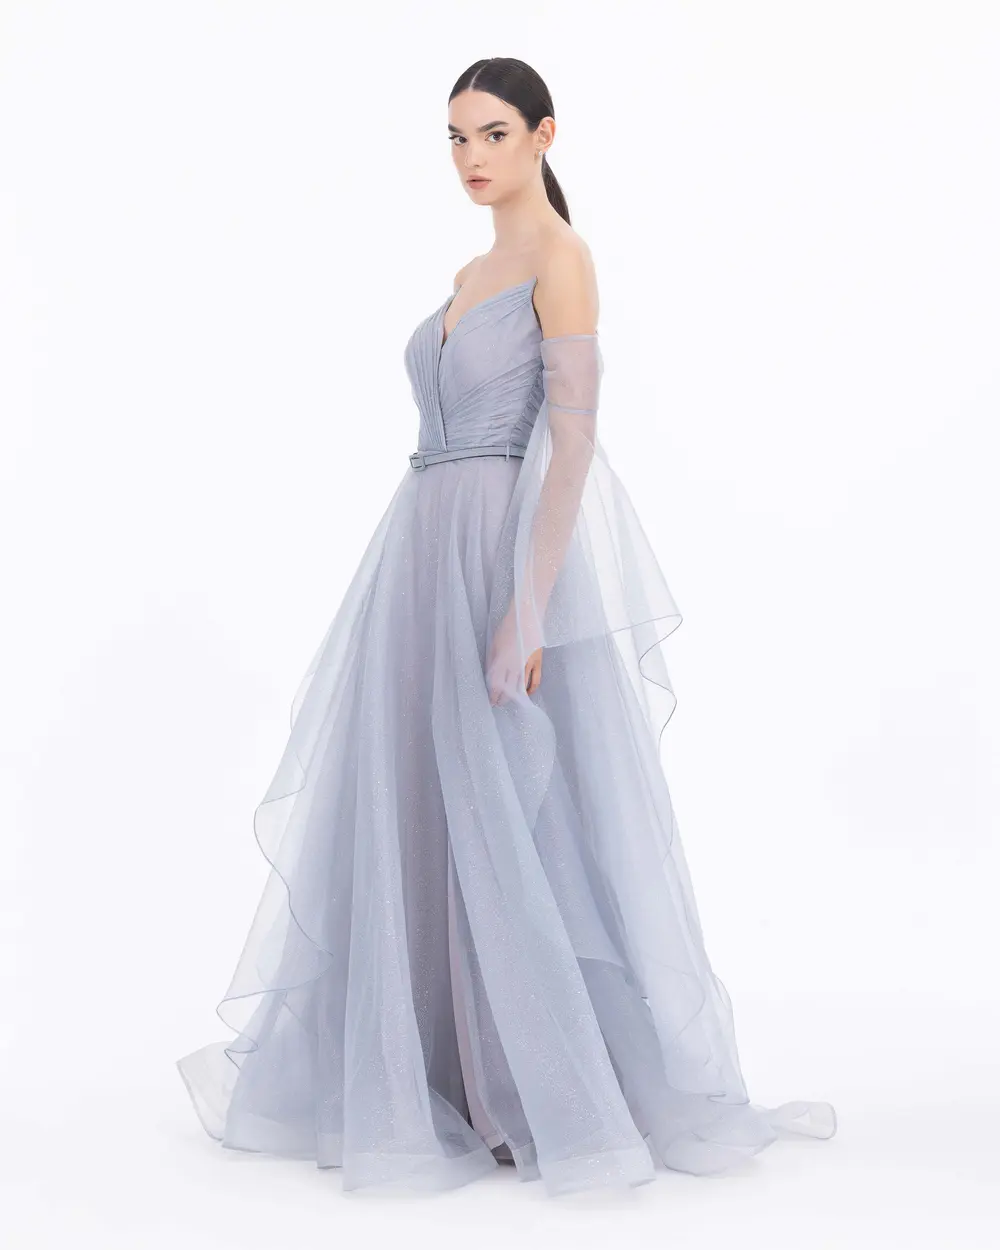 Dovetail Collar Detachable Sleeves Silvery Evening Dress